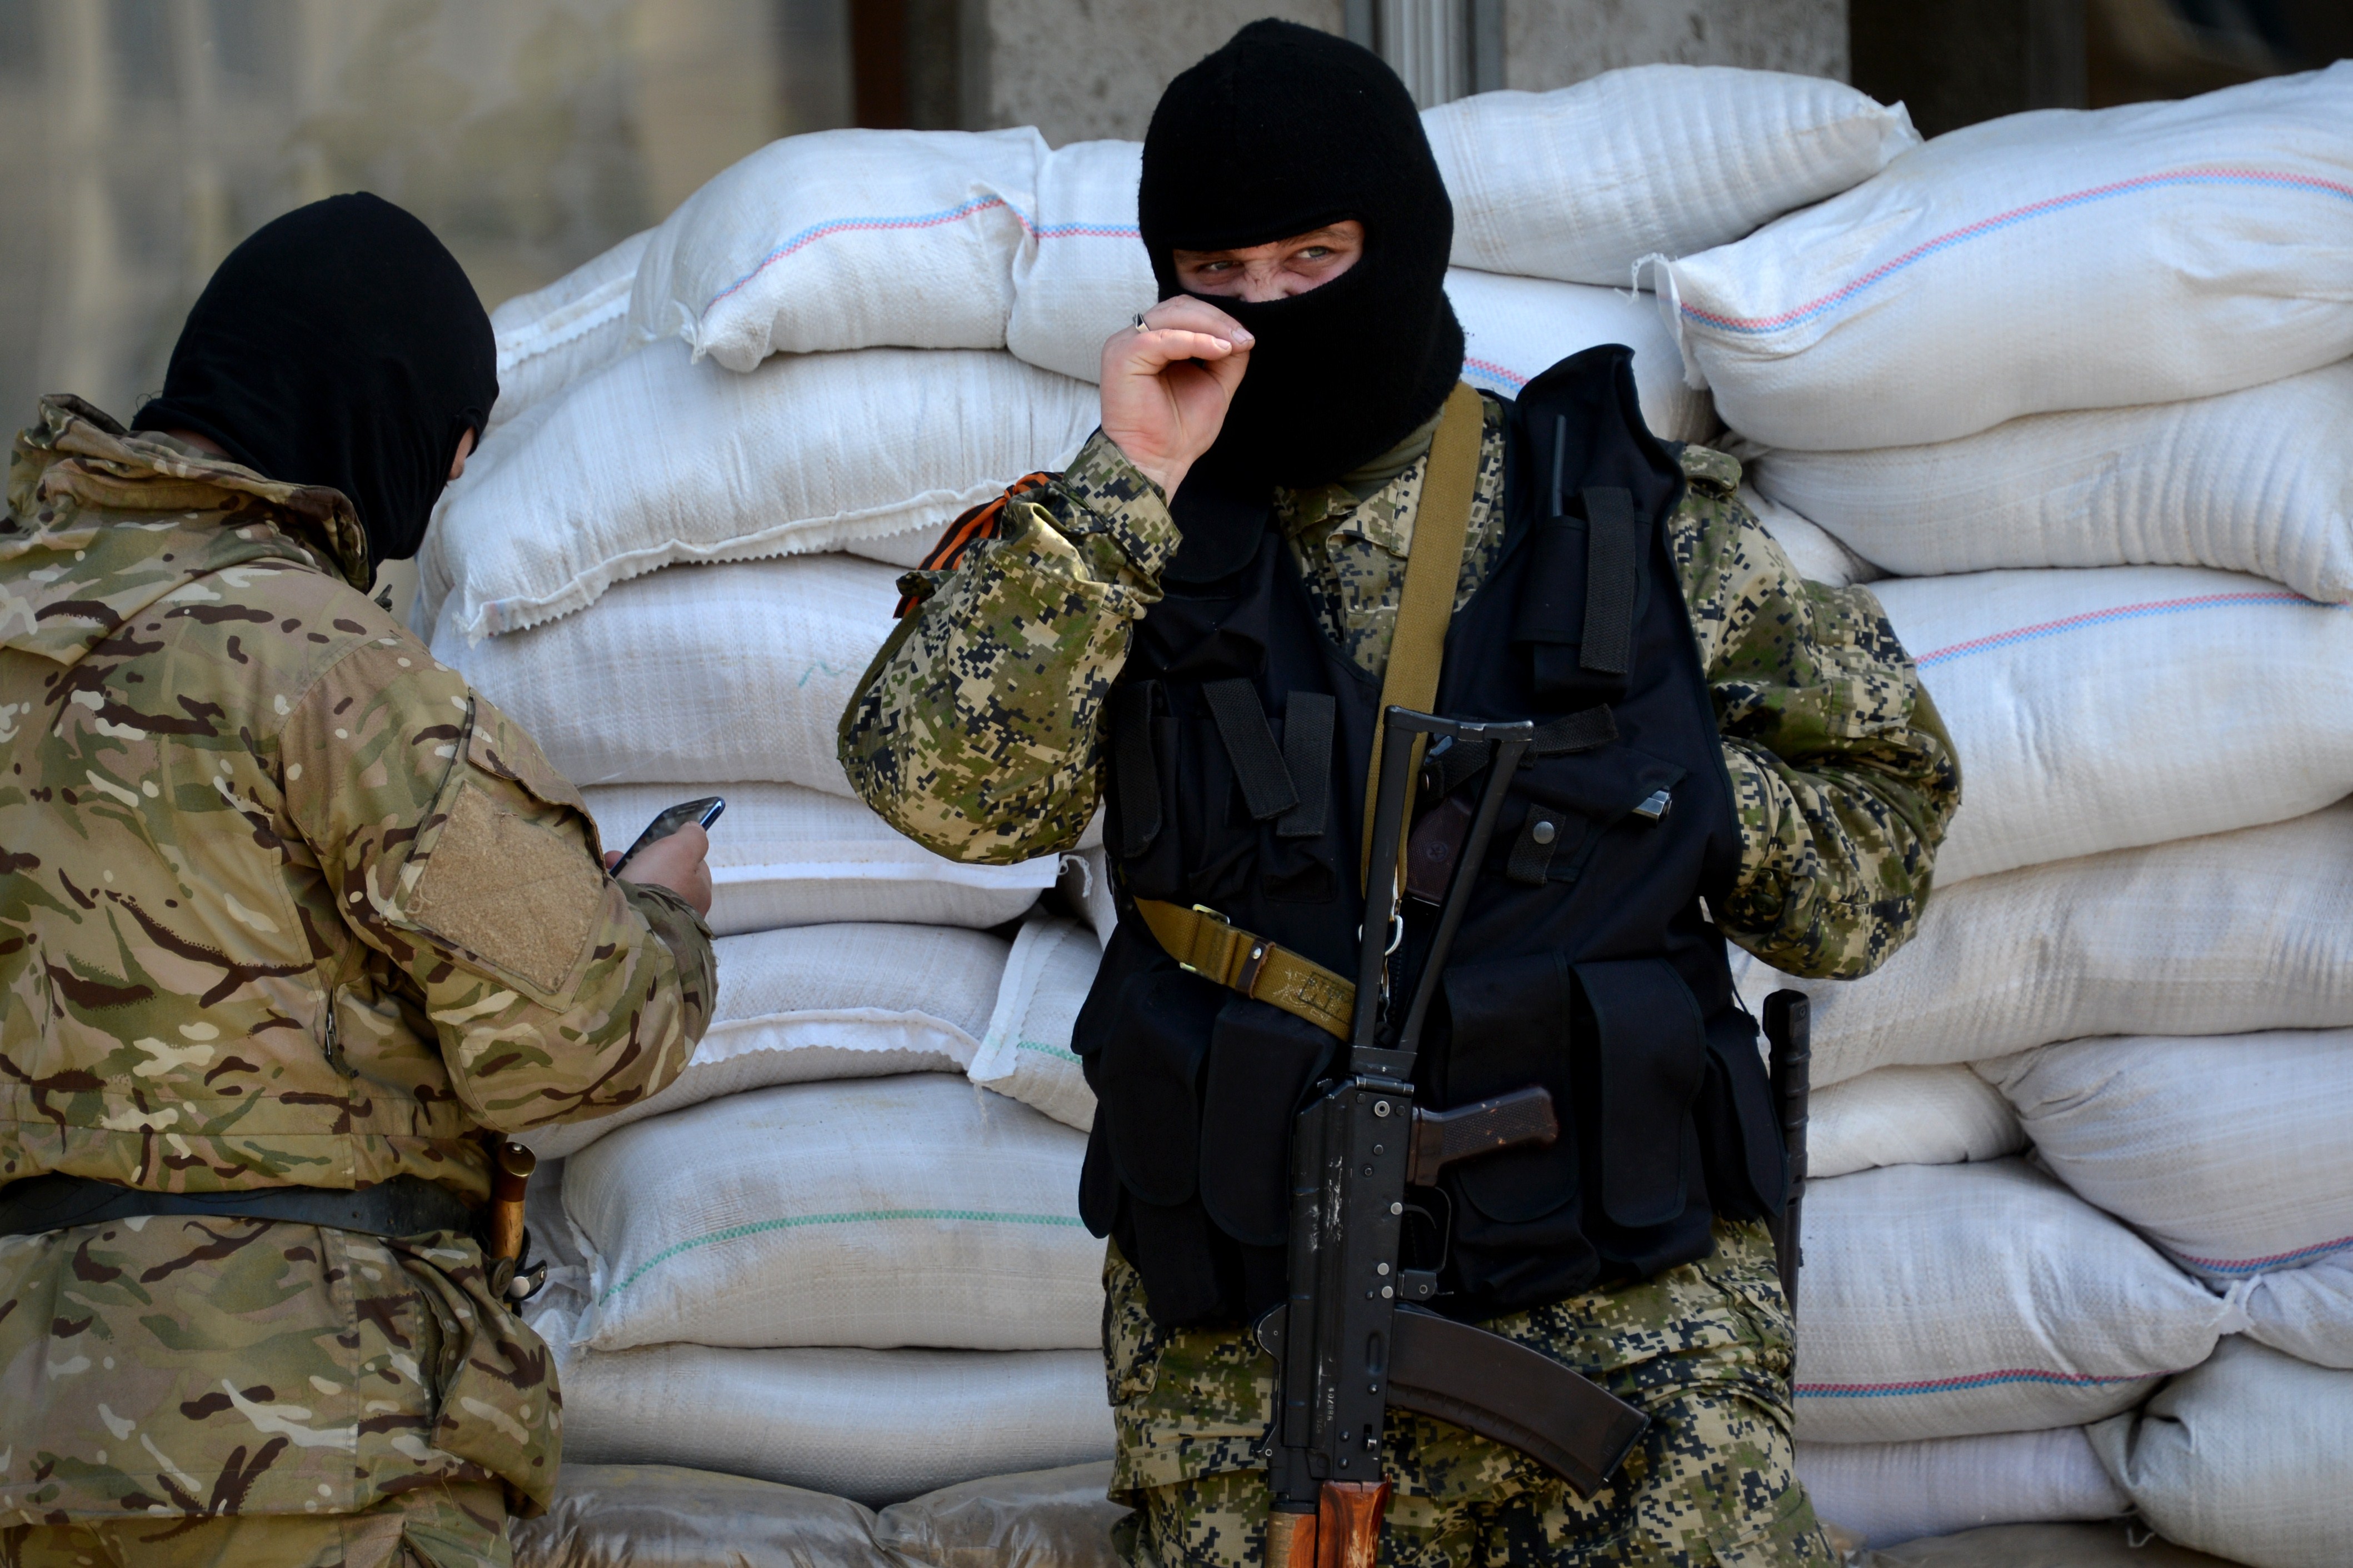 Pro Russian Separatists In Eastern Ukraine Thumb Noses At Interim Deal Cbs News 8853